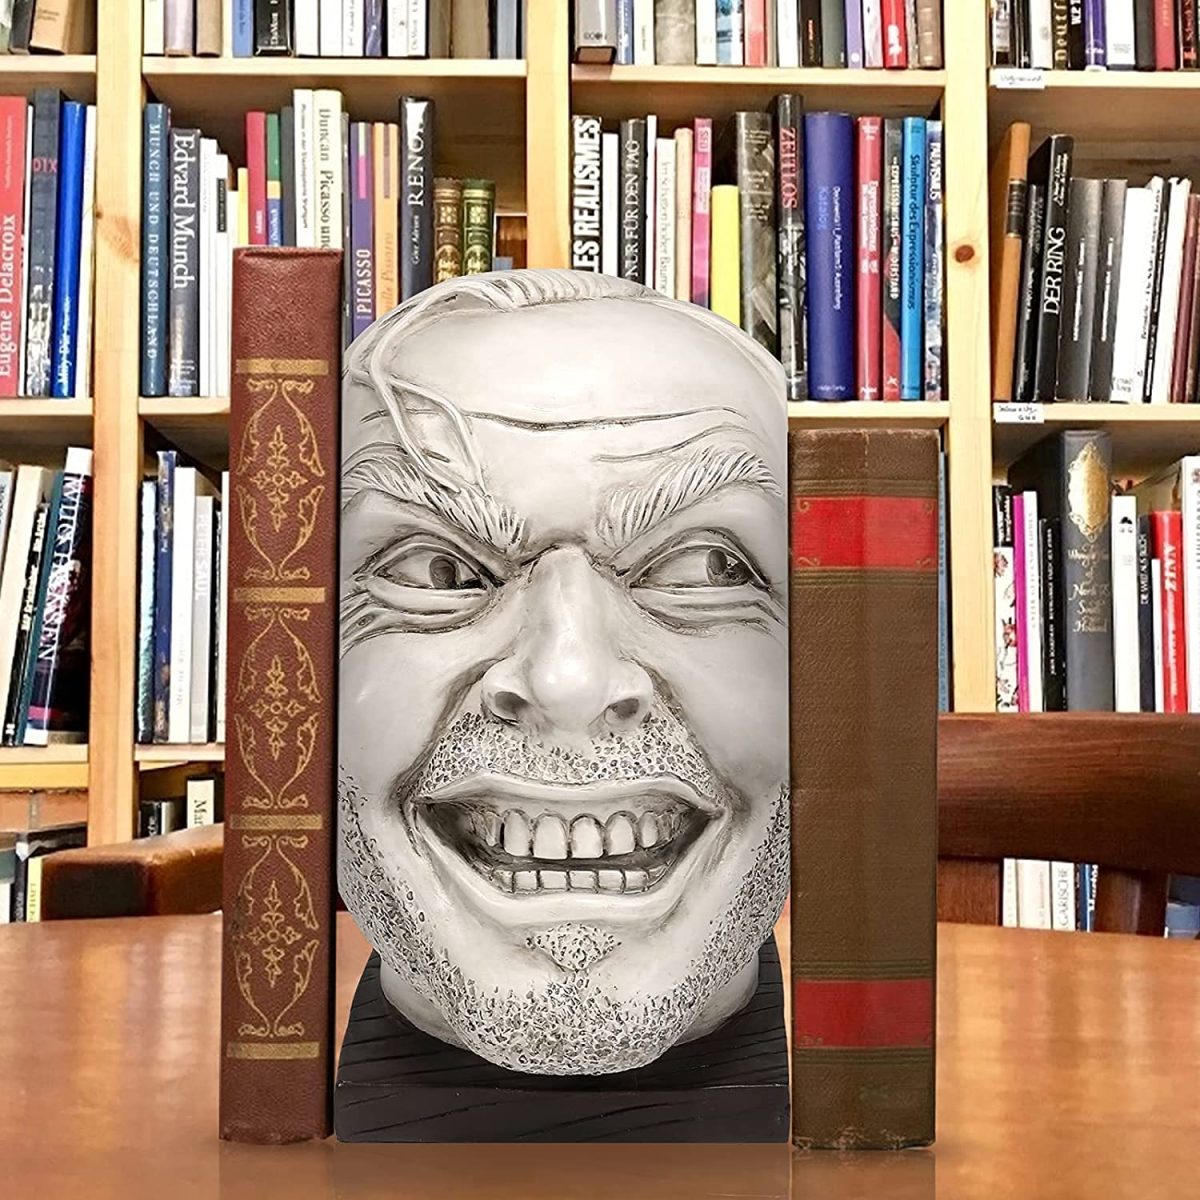 The Shining Bookend Sculpture